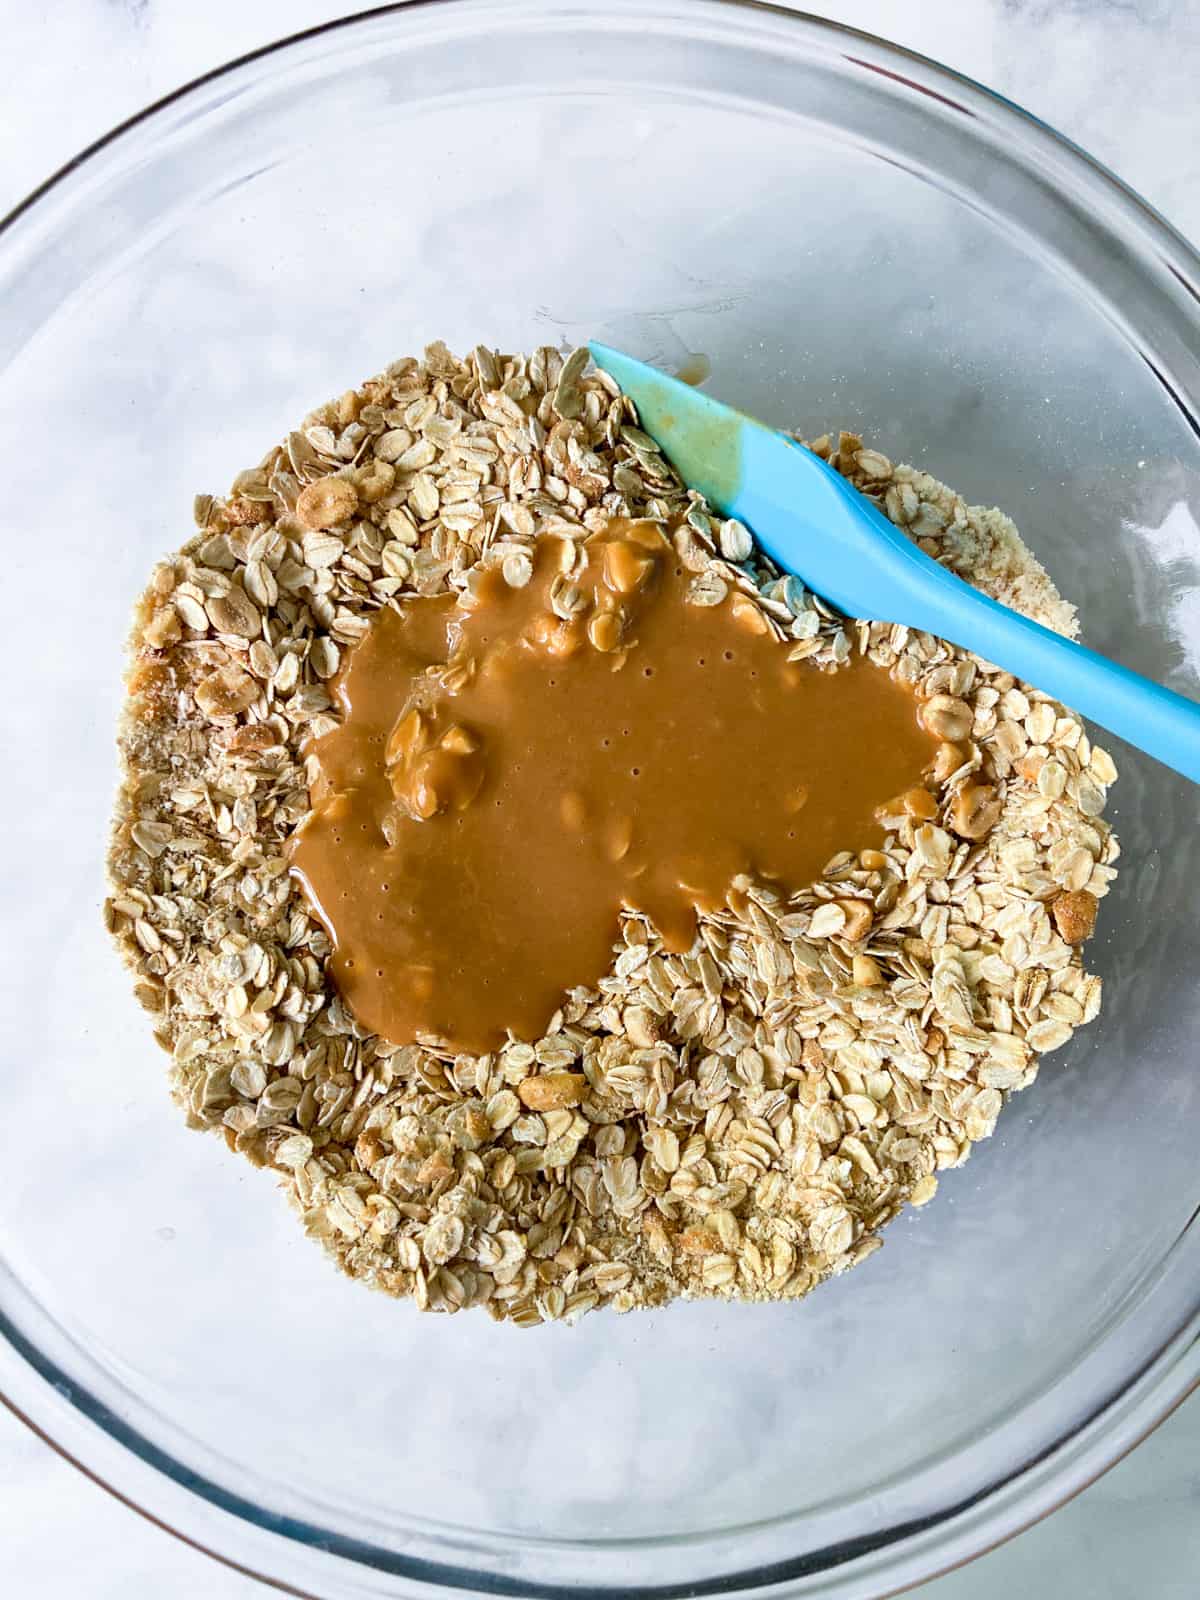 Melted peanut butter mixture poured over the dry ingredients in a bowl.